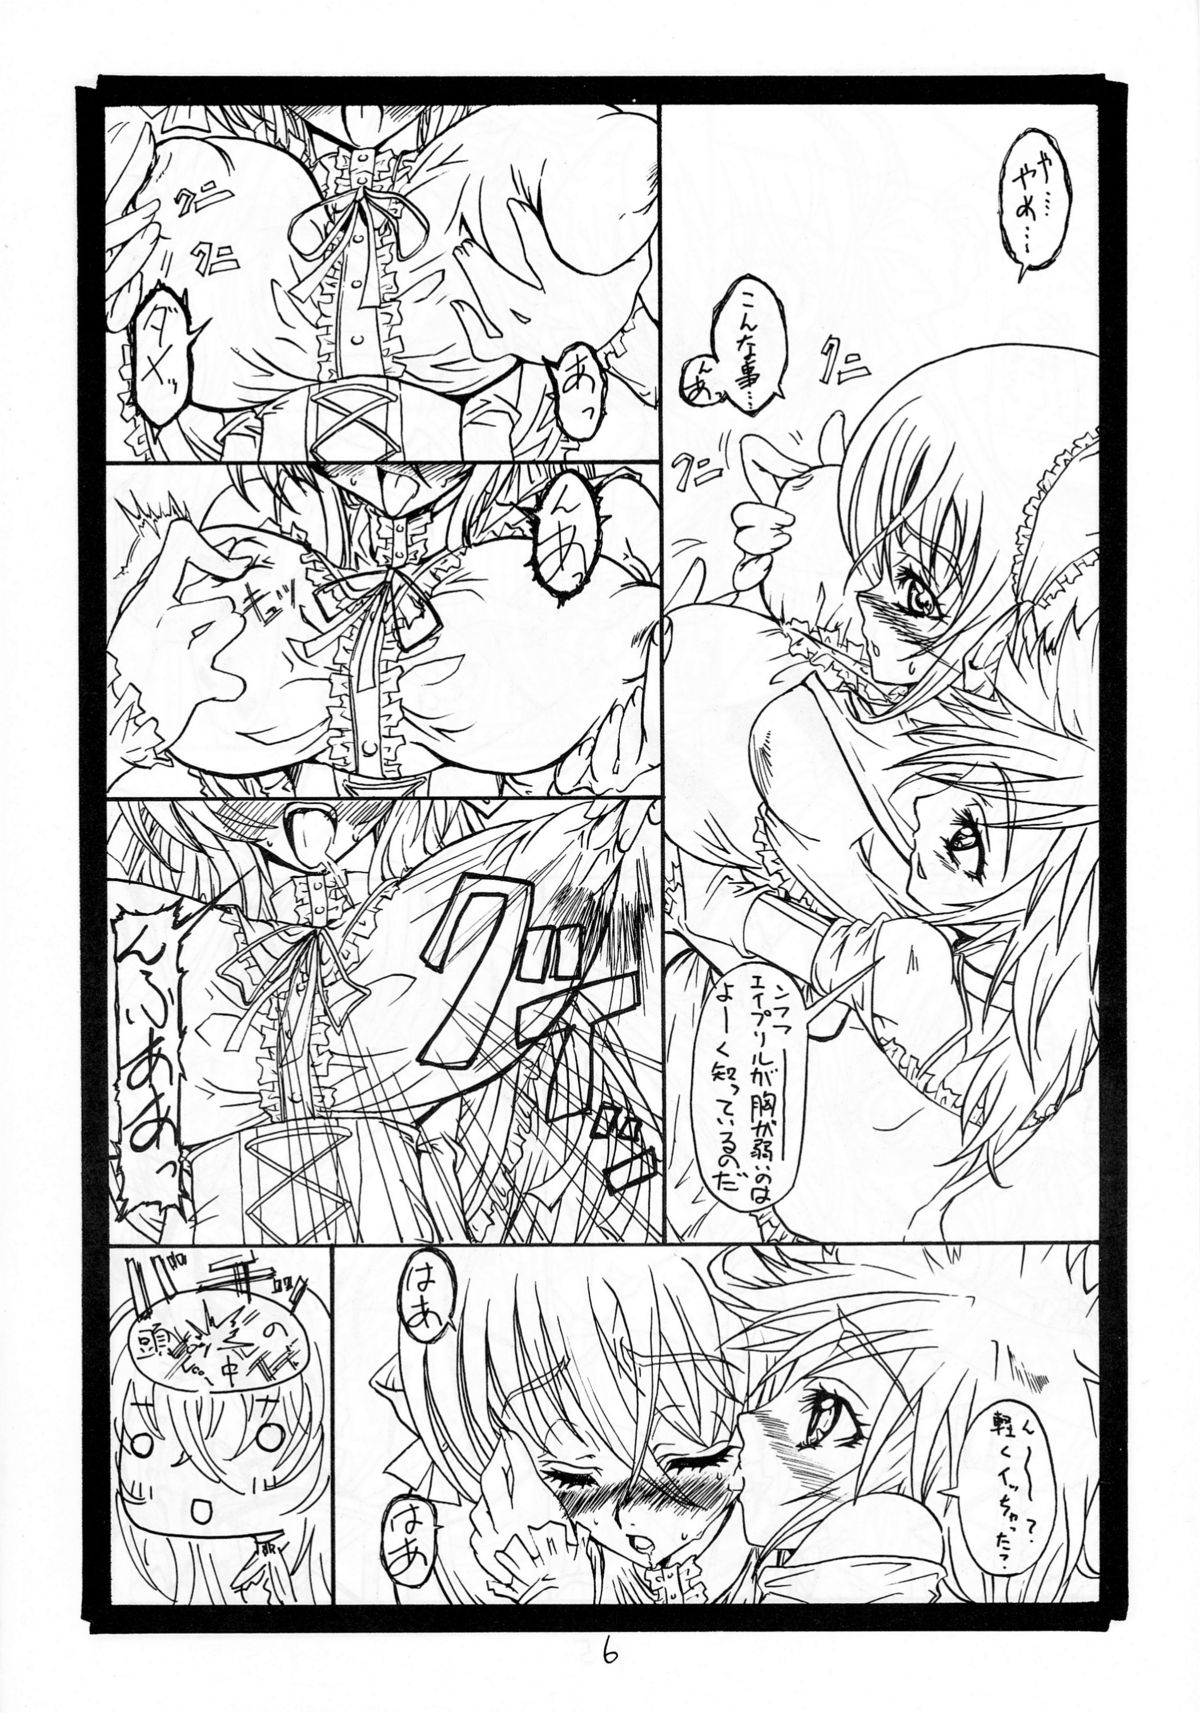 (C71) [S-G.H. (Oona Mitsutoshi)] SUICIDA DESESPERACION (Coyote Ragtime Show) page 6 full